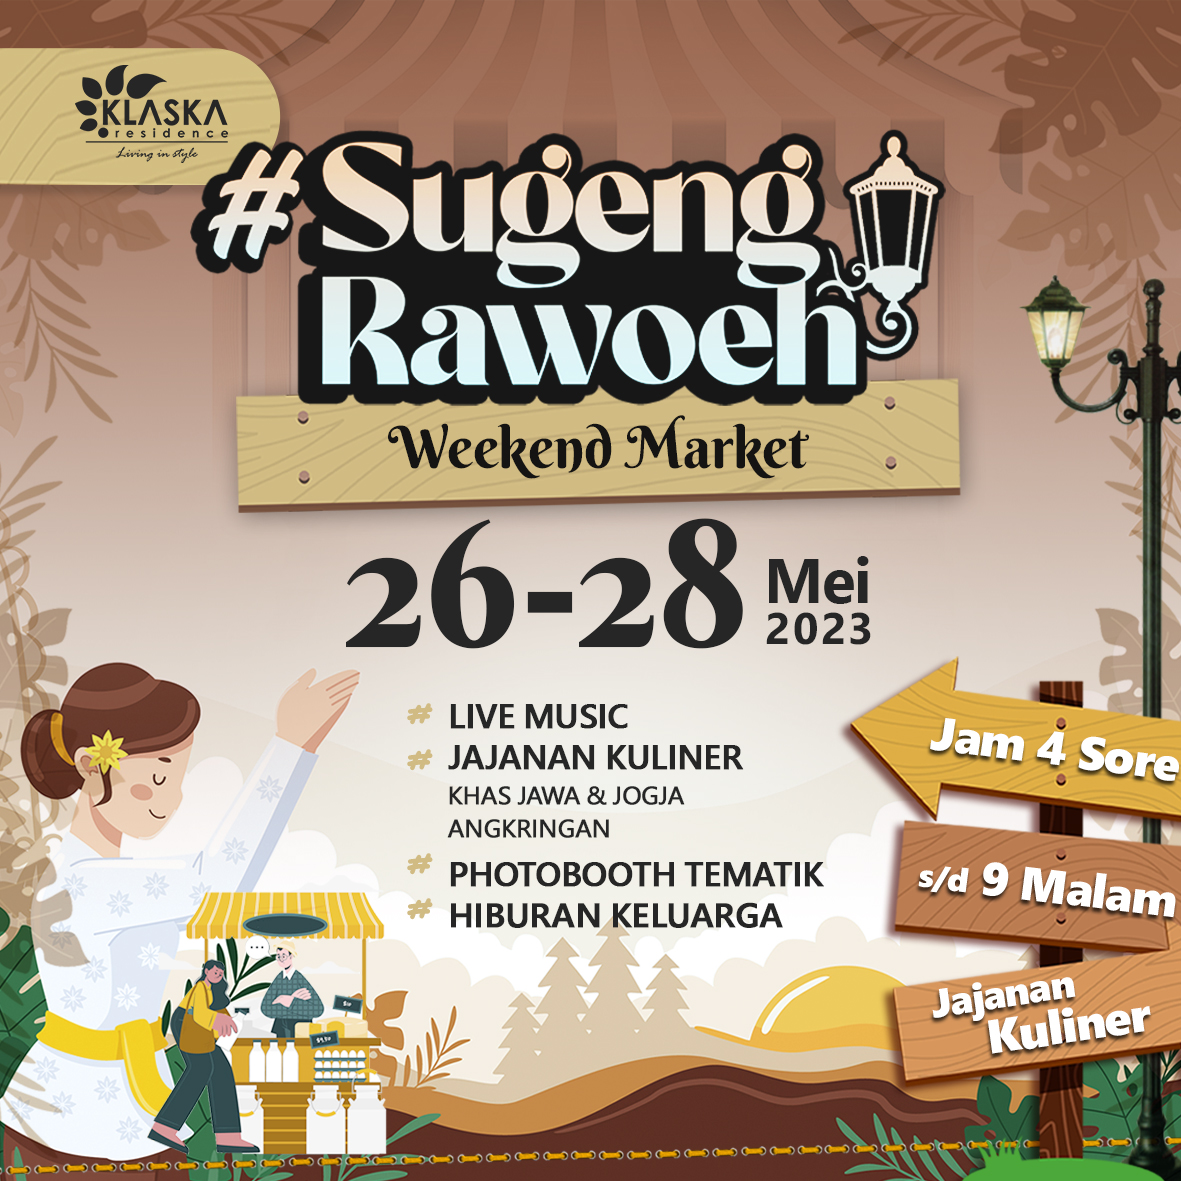 SUGENG RAWOEH WEEKEND MARKET - Want a fun weekend full of culinary snacks and family entertainment?&nbsp;Just drop by the eventSUGENG RAWOEH ~ Weekend MarketFriday to SundayMay 26-28, 202316.00 - 21.00 WIBKlaska Residence Azure Tower&nbsp;There will be:Live MusicJogja Culinary Specialties &amp; snacks;Teras AngkringanThematic PhotoboothDoorprizeZumba Partyand many other exciting events...&nbsp;See you there!